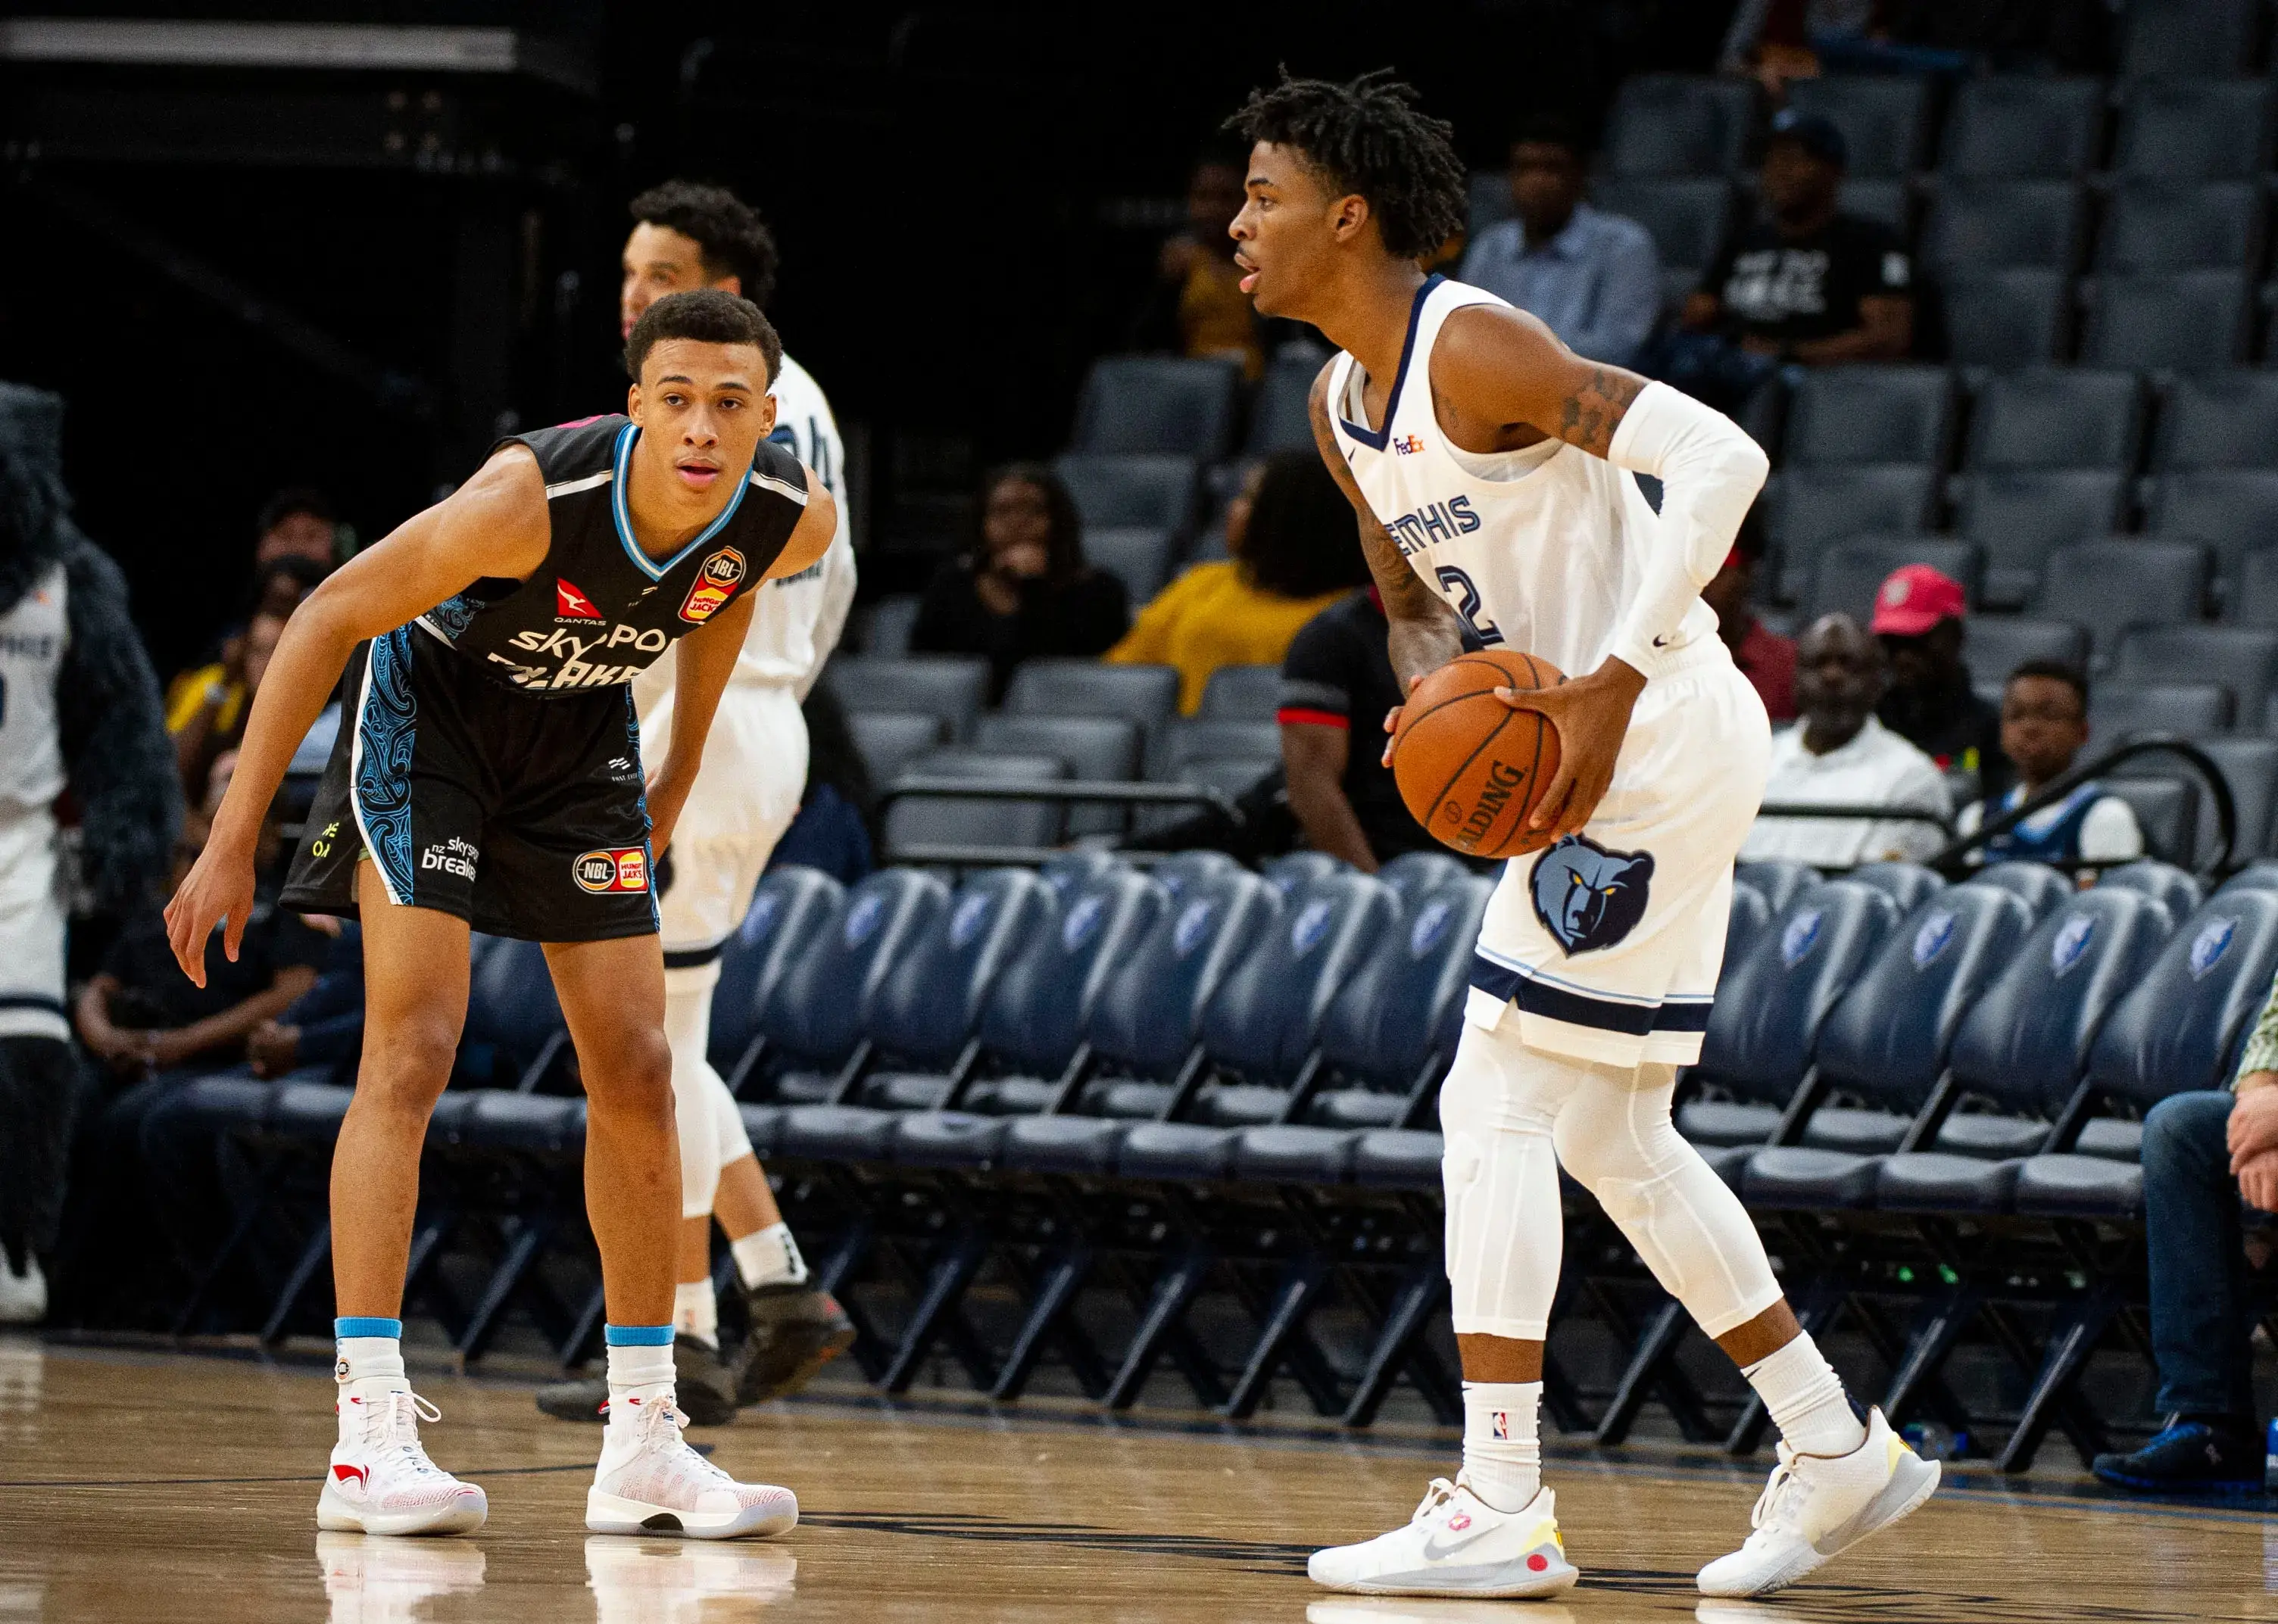 Oct 8, 2019; Memphis, TN, USA; Memphis Grizzlies guard Ja Morant (12) handles the ball against New Zealand Breakers guard R.J. Hampton (14) during the first half at FedEx Forum. / © Justin Ford-USA TODAY Sports